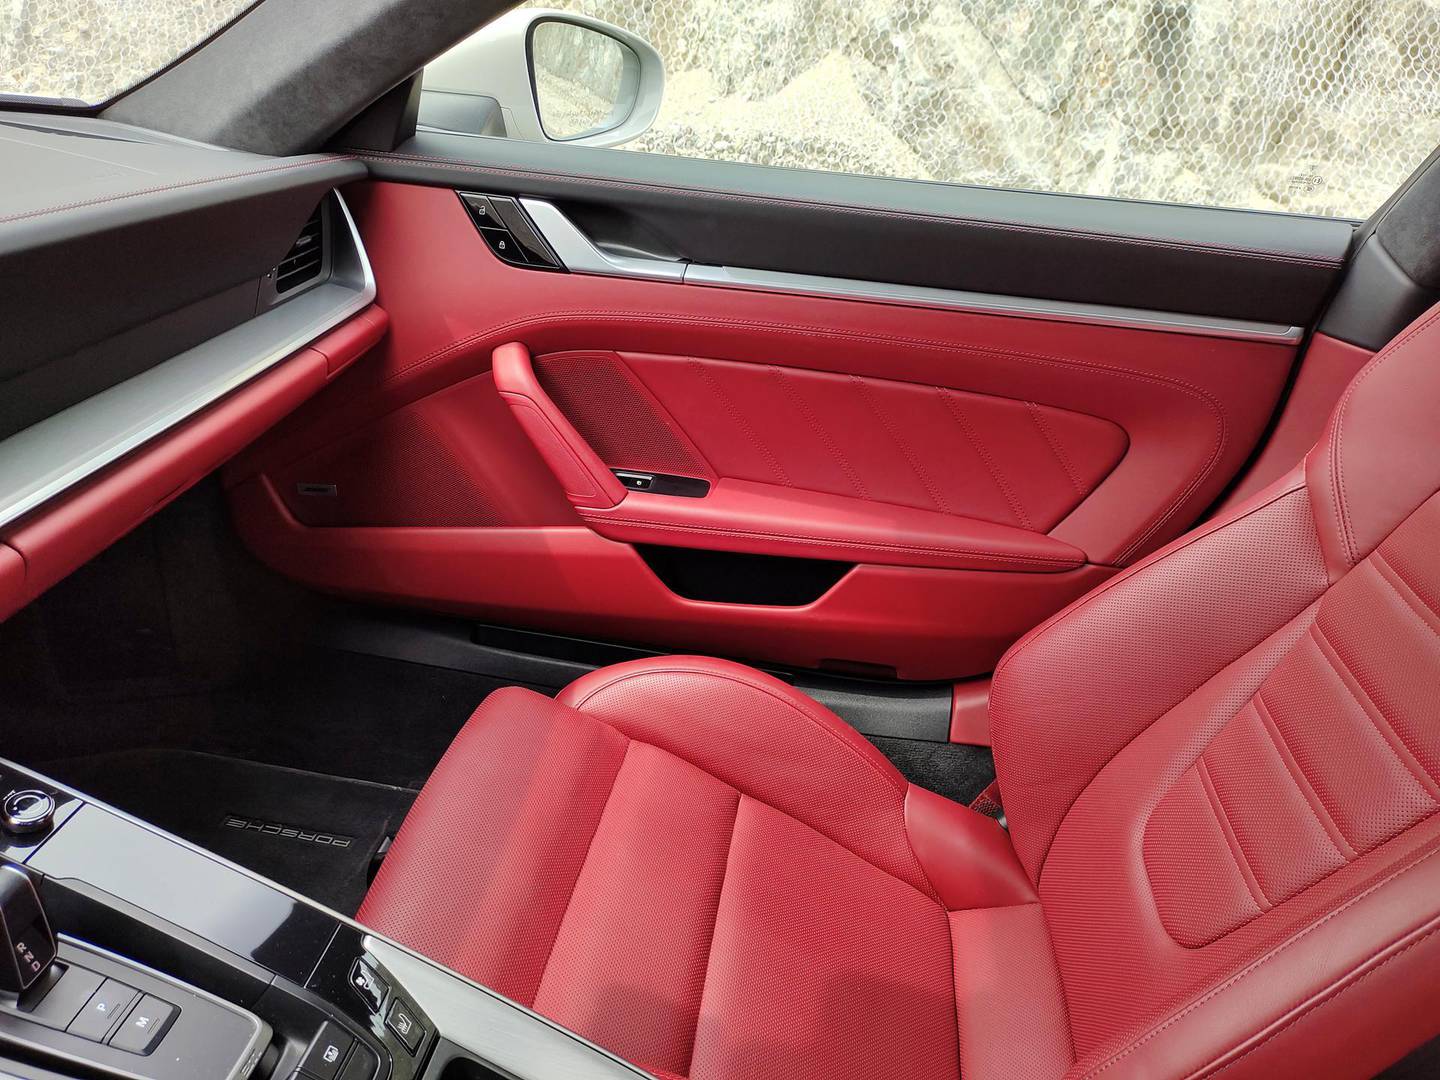 This is essentially a two-person car with the rear seats are for show only. Courtesy Gautam Sharma